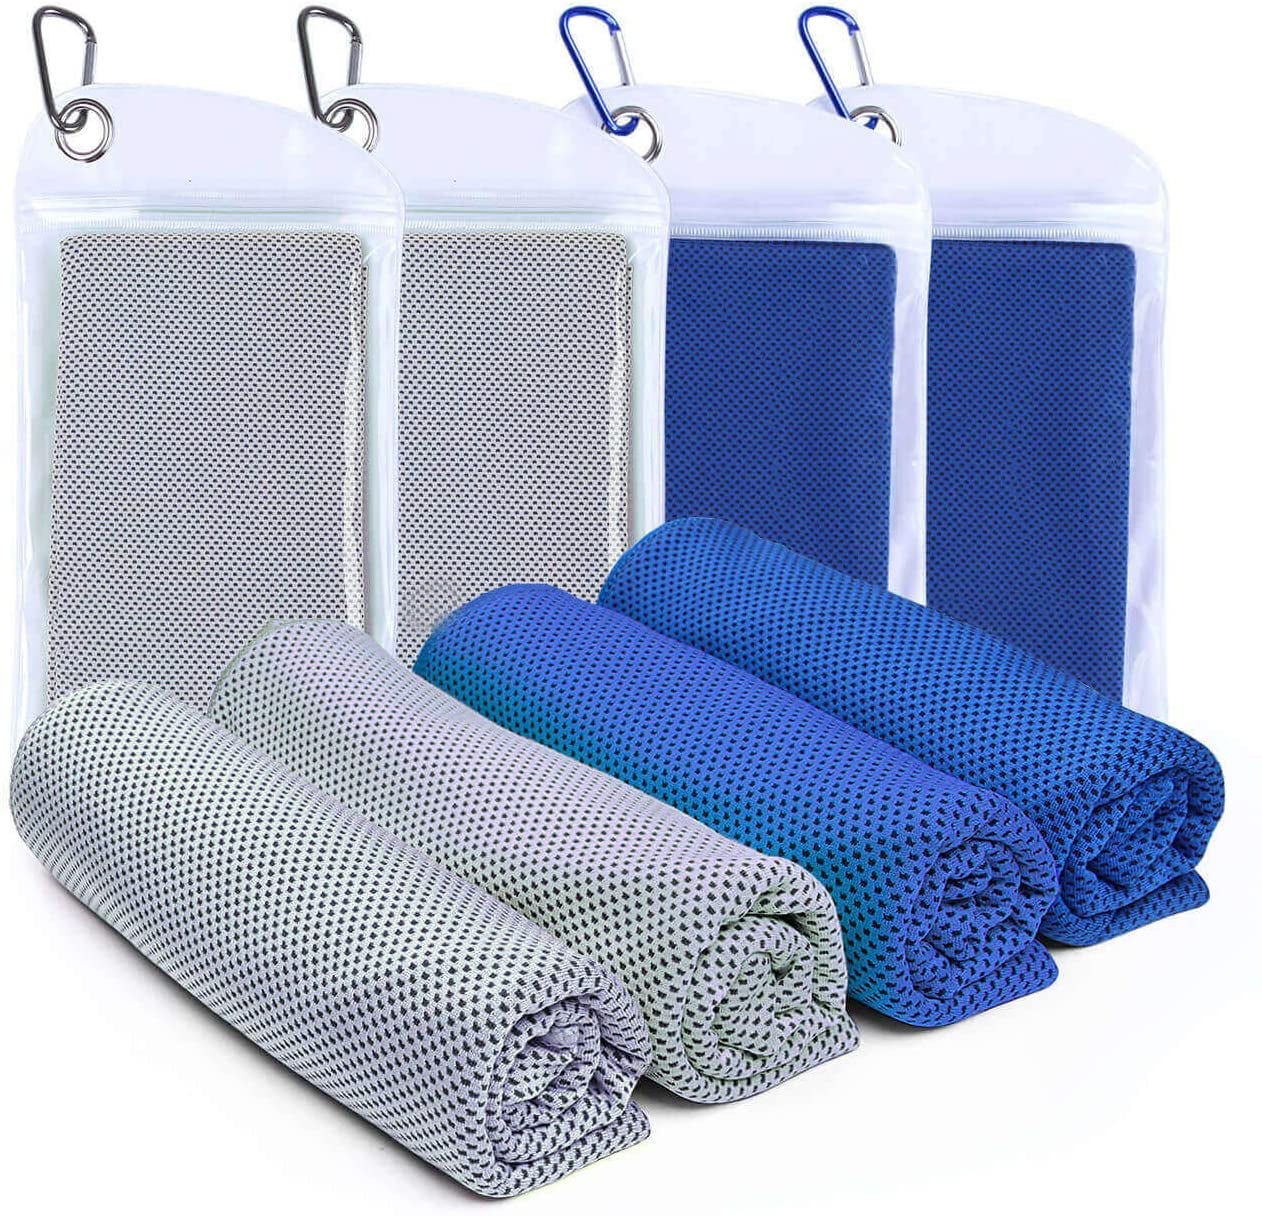 Gym 40x12 Cooling Towel Black/Blue/Dark Blue Workout & More Activities Microfiber Cool Towel,Soft Breathable Chilly Towel for Yoga Golf Running Camping 